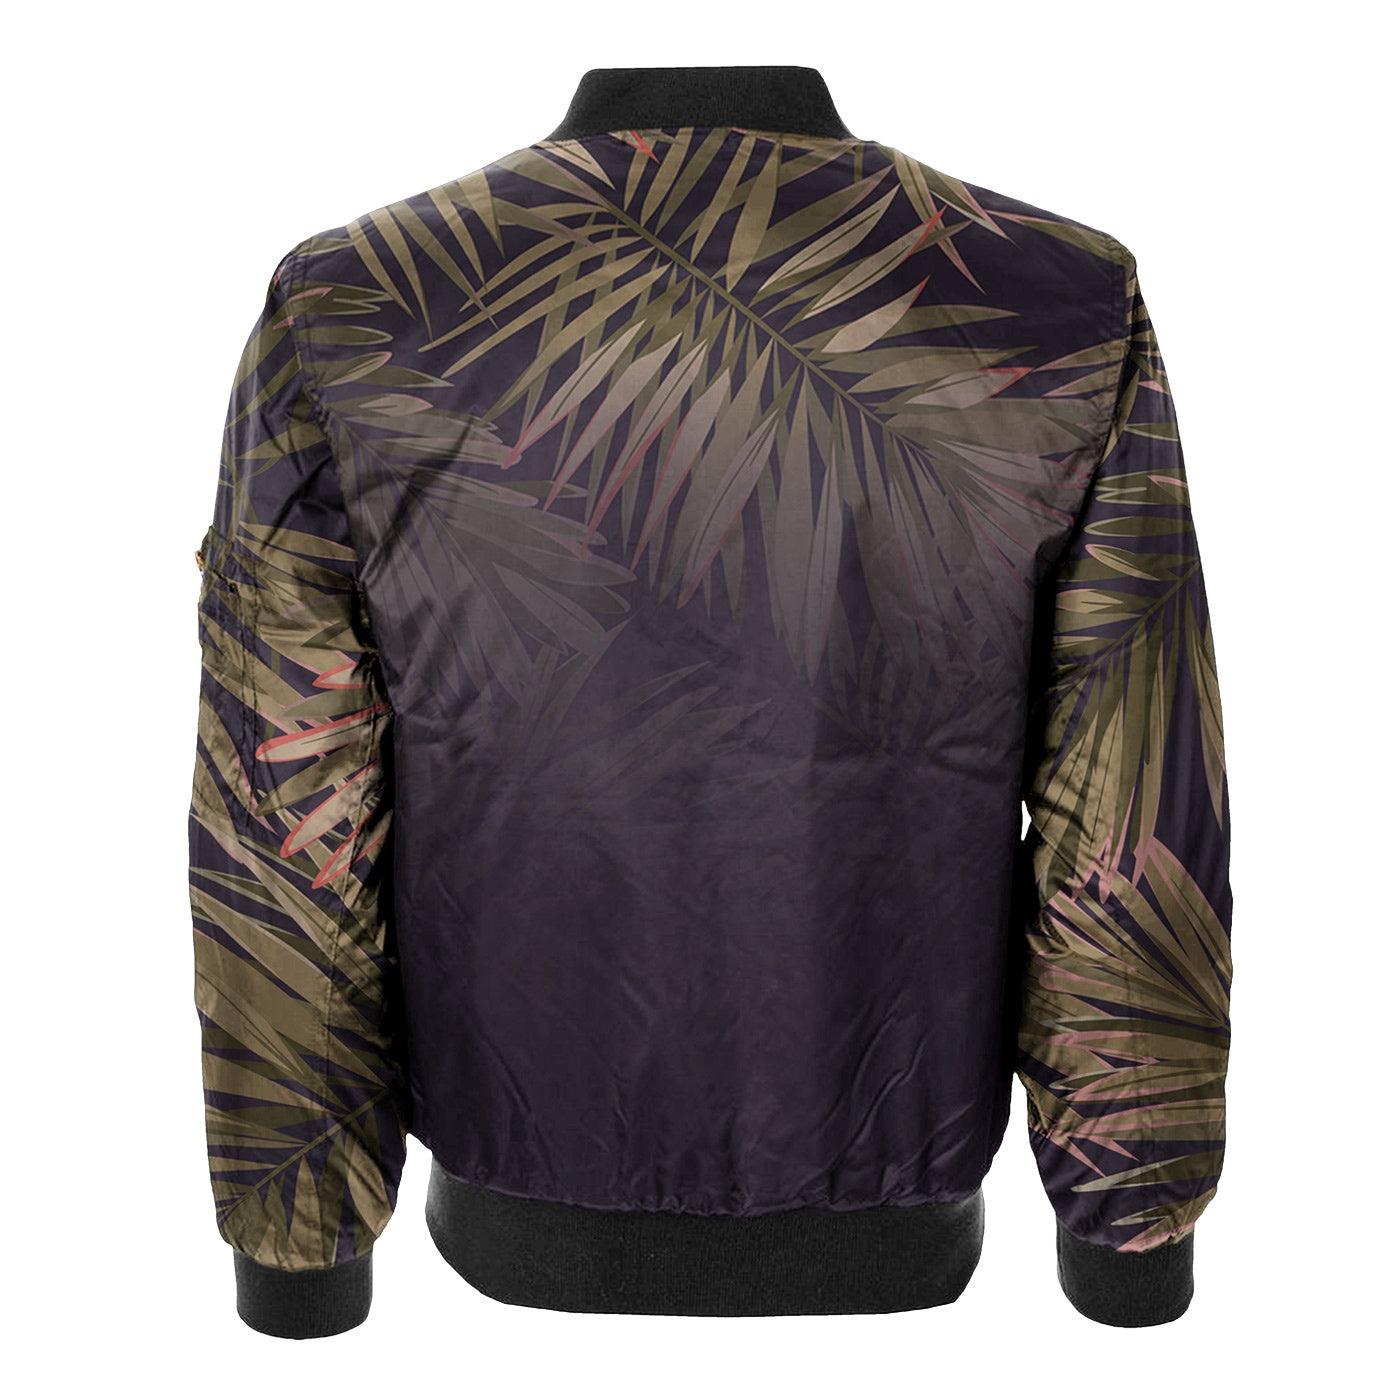 Palm To Fade Bomber Jacket